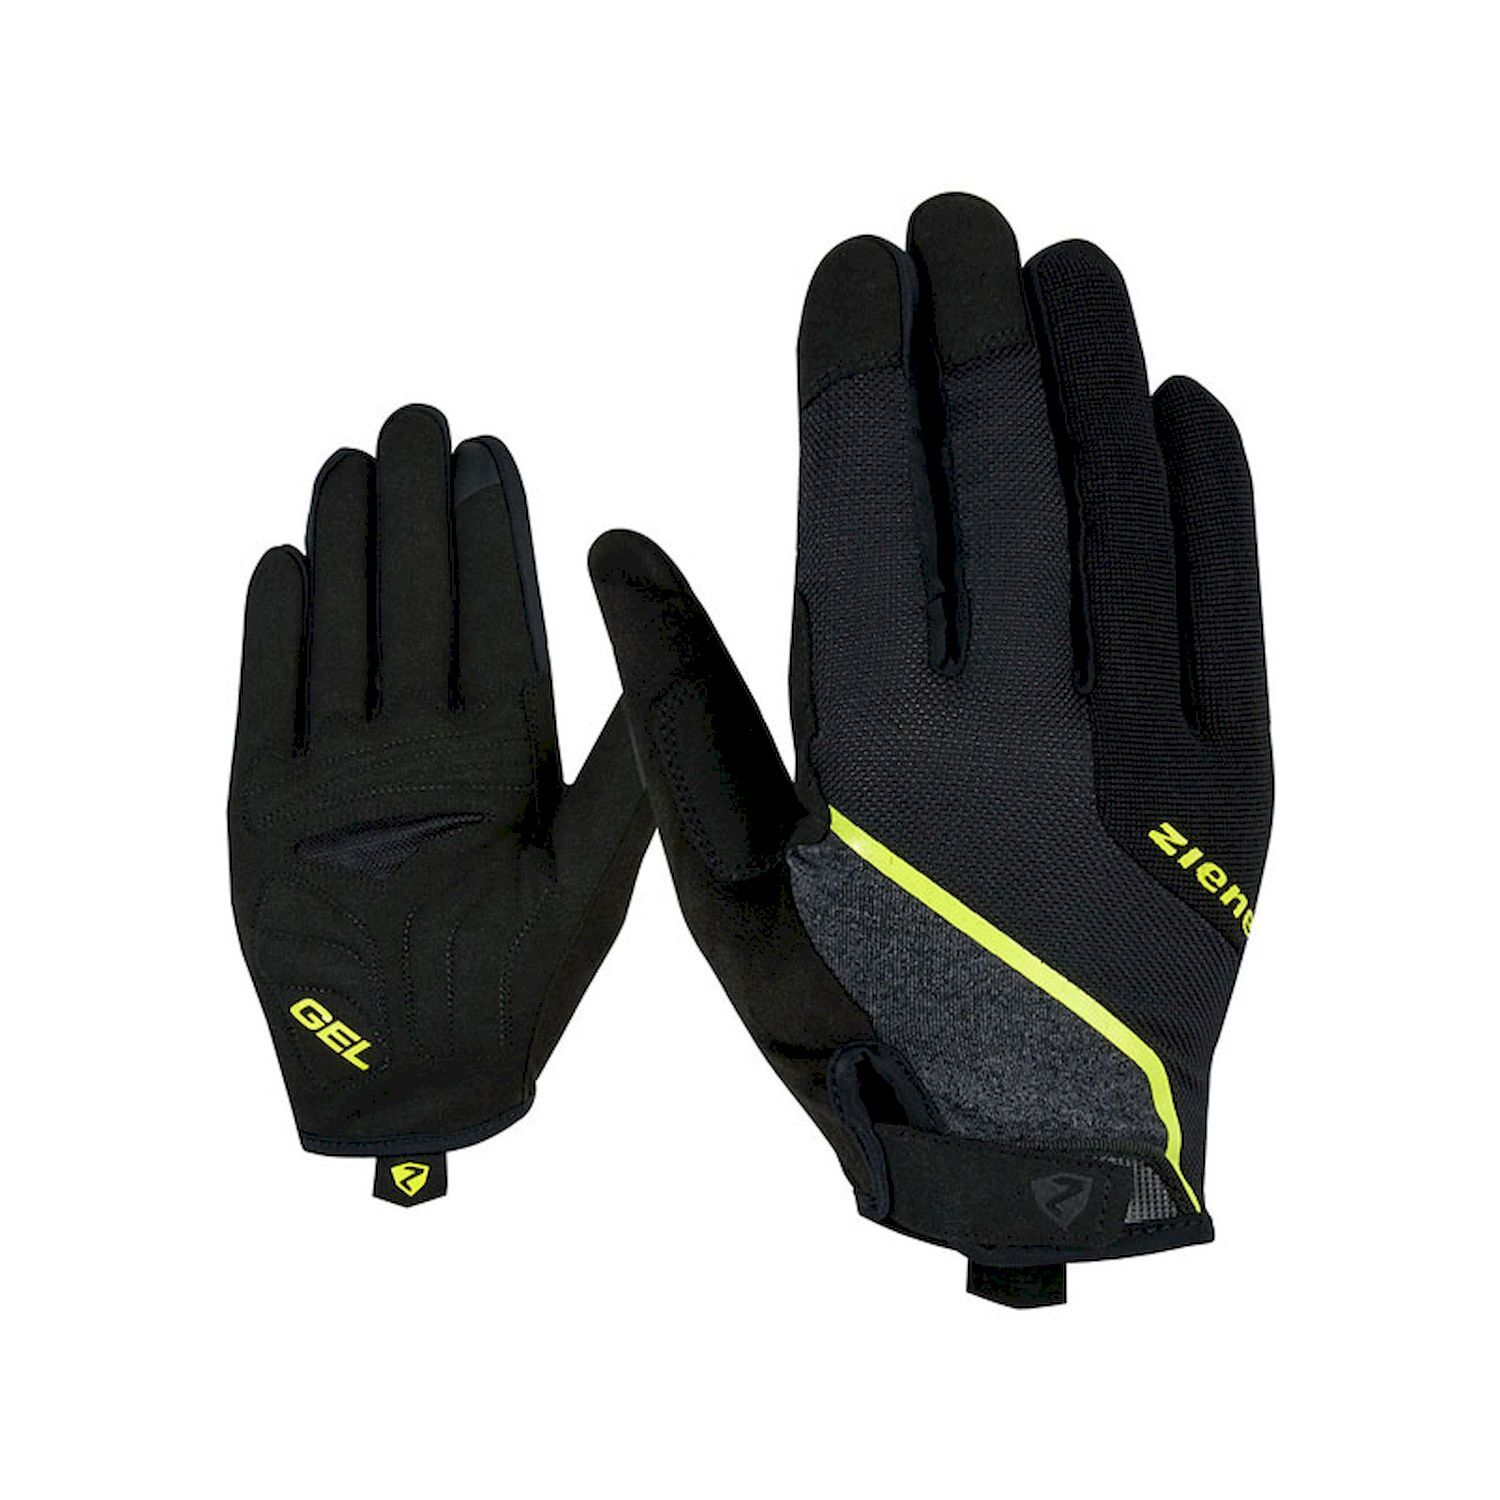 Ziener Clyo Touch Long - Cycling gloves - Men's